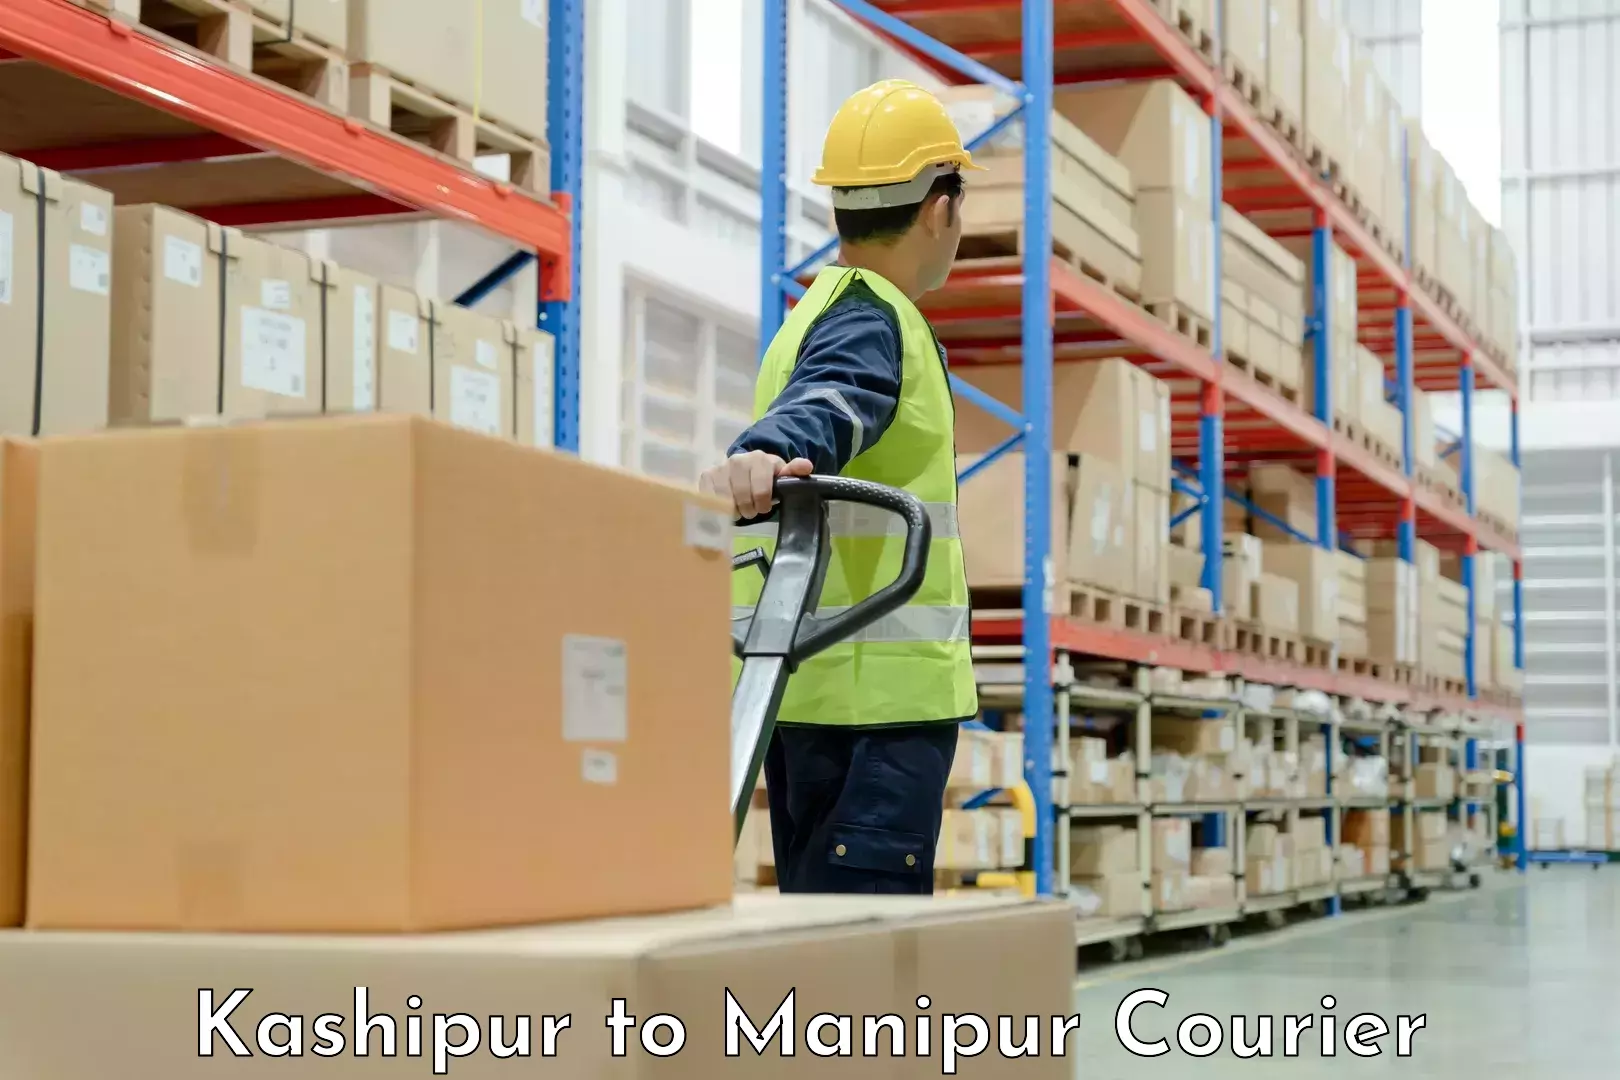 Trusted relocation experts Kashipur to Manipur